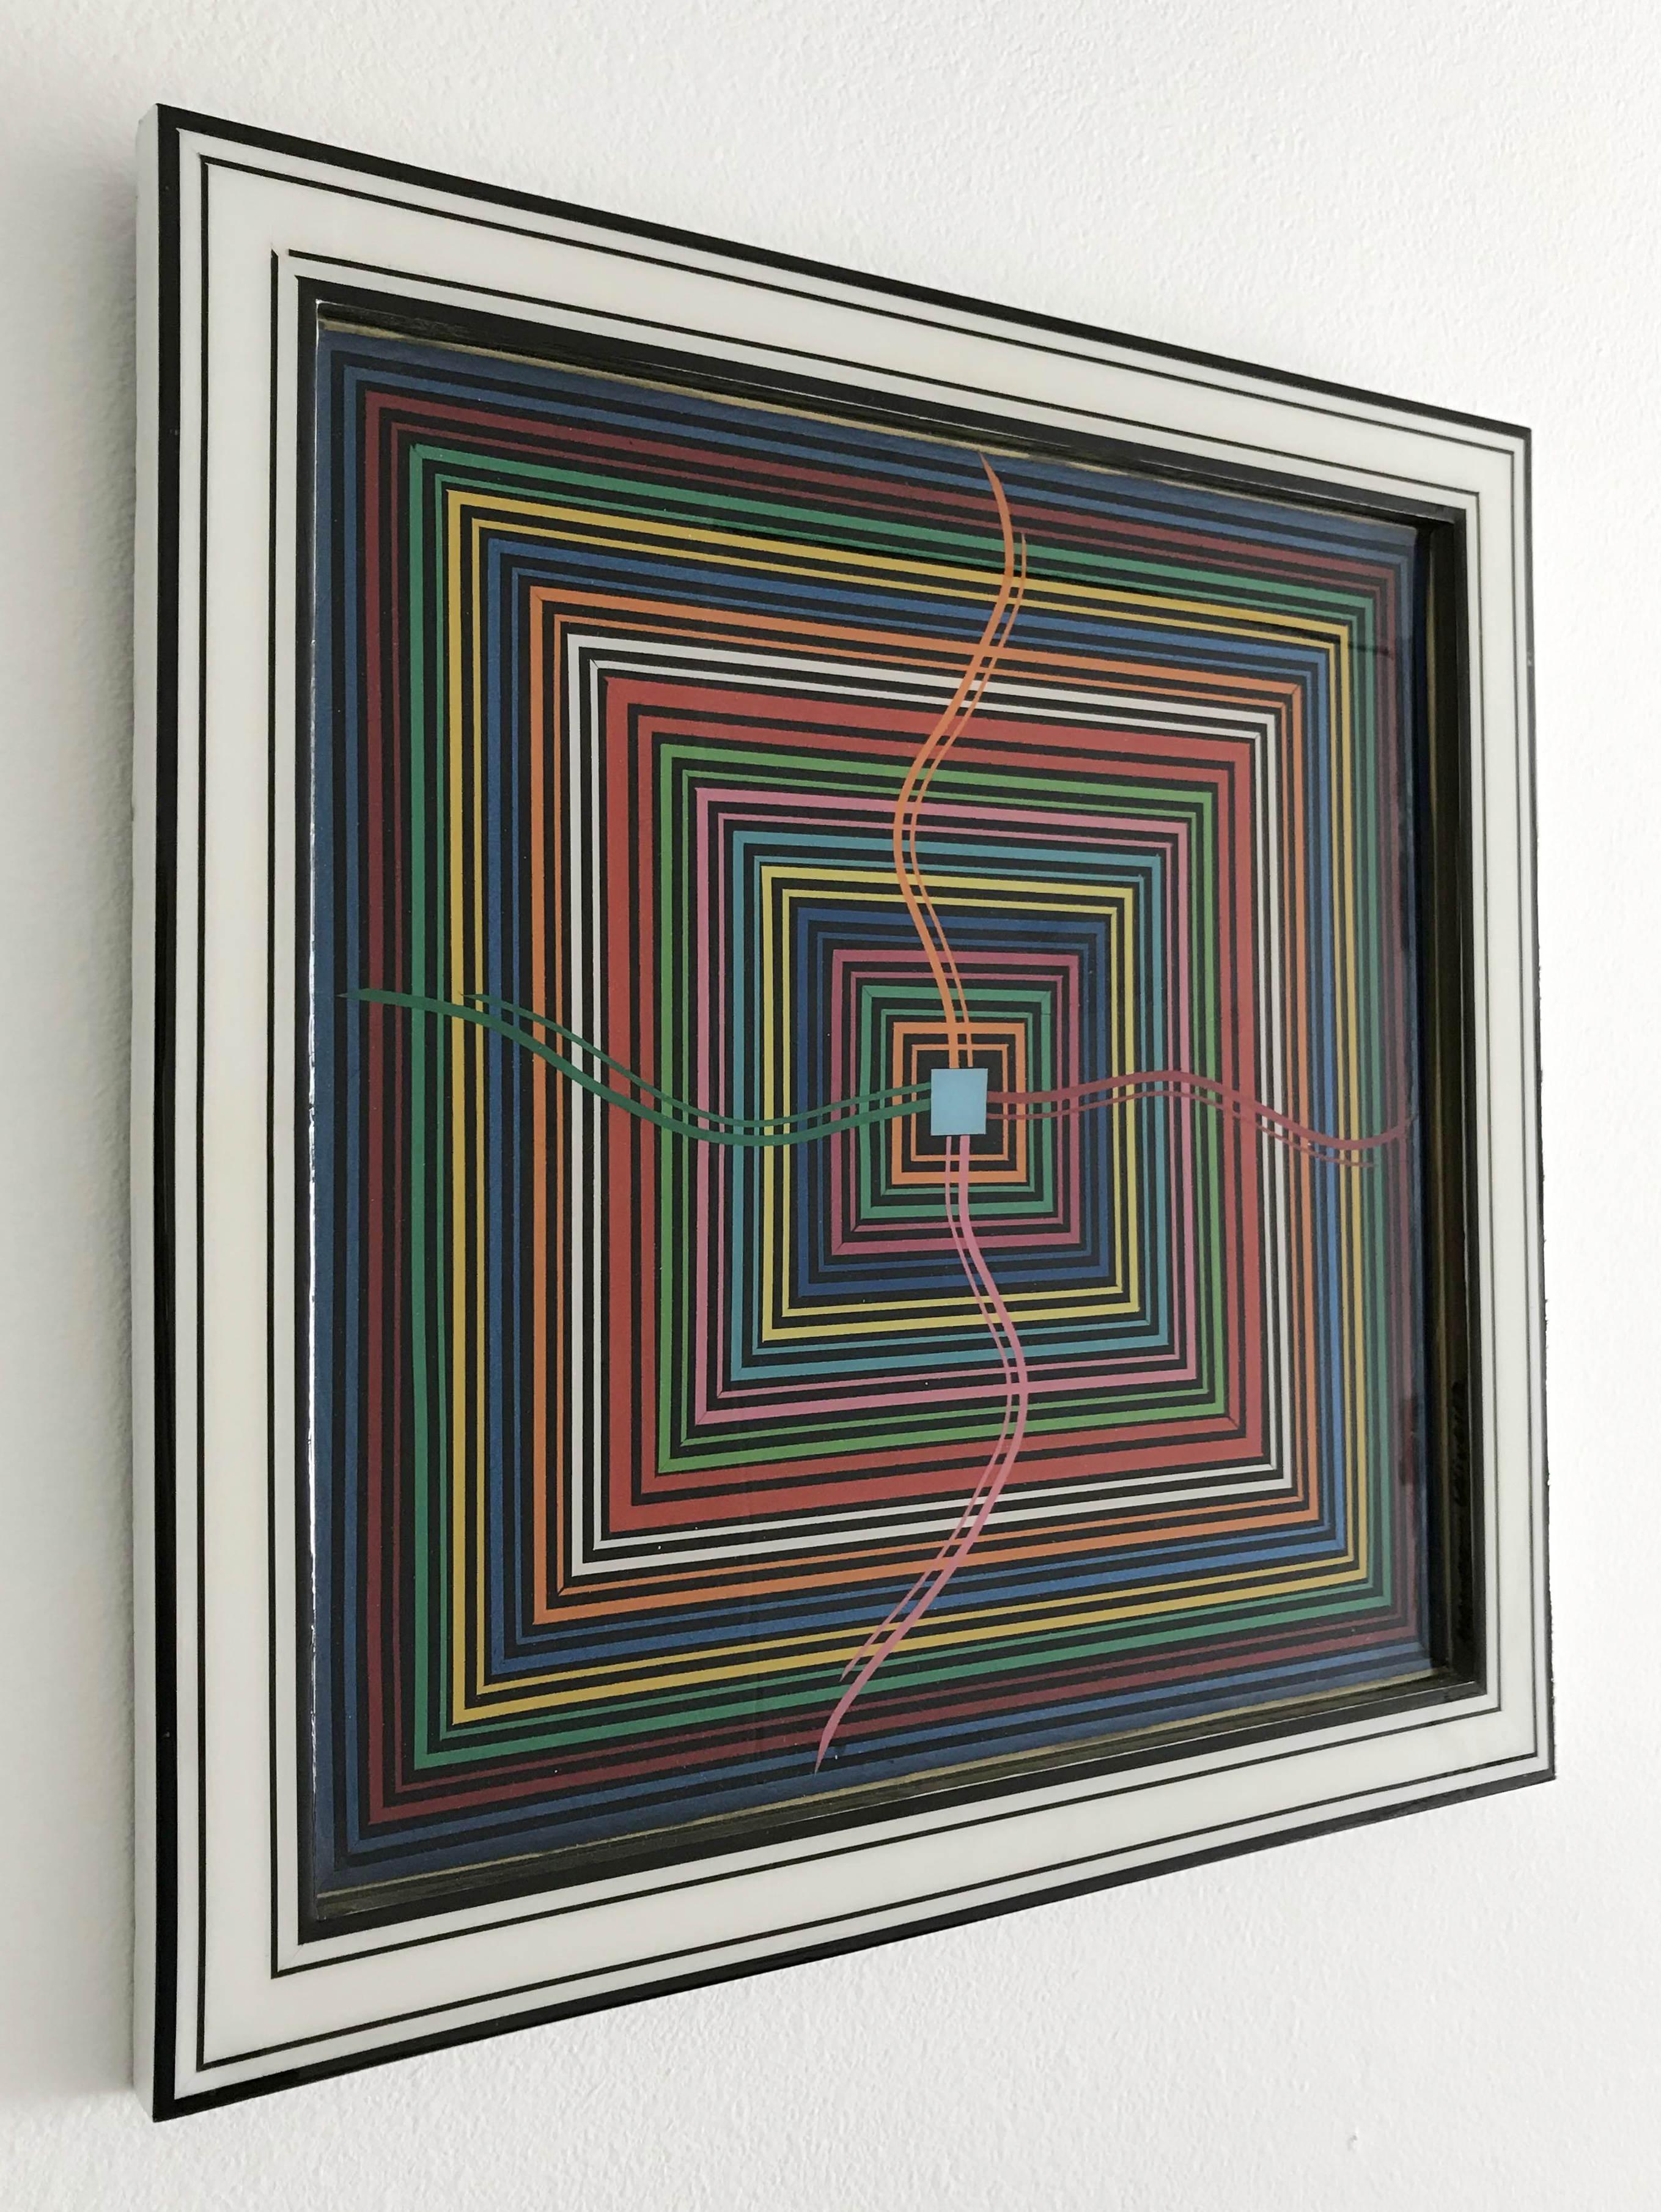 Epicenter by Mauro Oliveira, signed. Vinyl tapes, acrylic paint covered with resin on wood frame
Height: 18 inches / Width: 18 inches / Depth: 0.75 inches
1 in stock in Los Angeles ON 50% OFF SALE for $449 !!!
Order Reference #: FABIOLTD